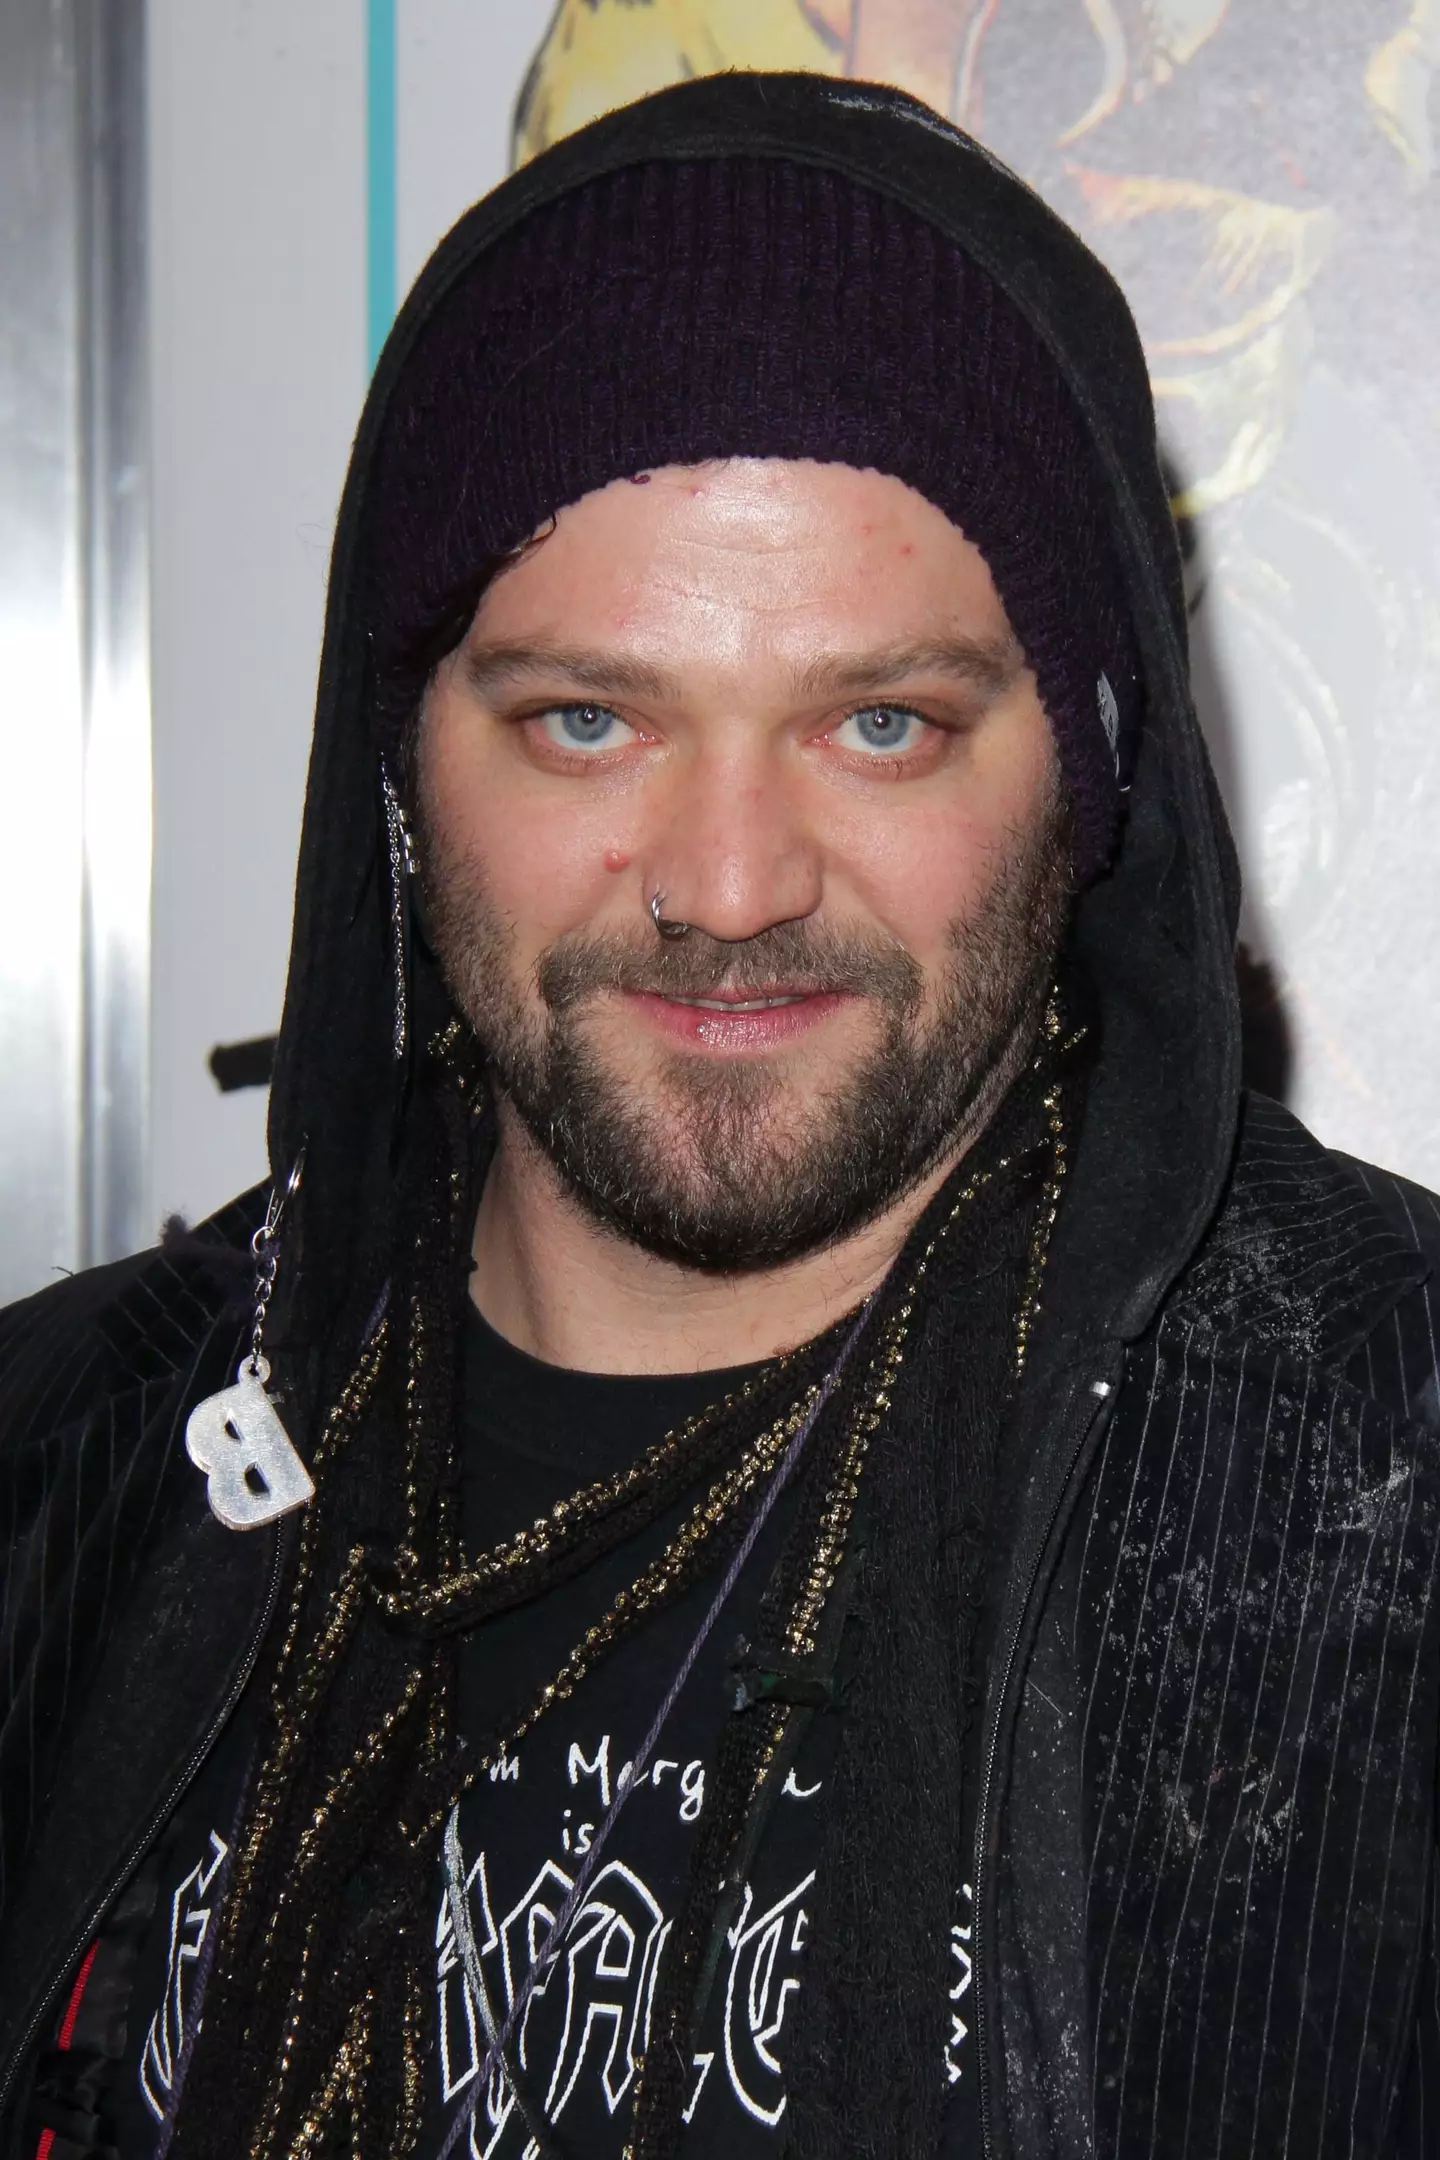 Bam Margera has been found in a Florida hotel after fleeing his rehab facility.